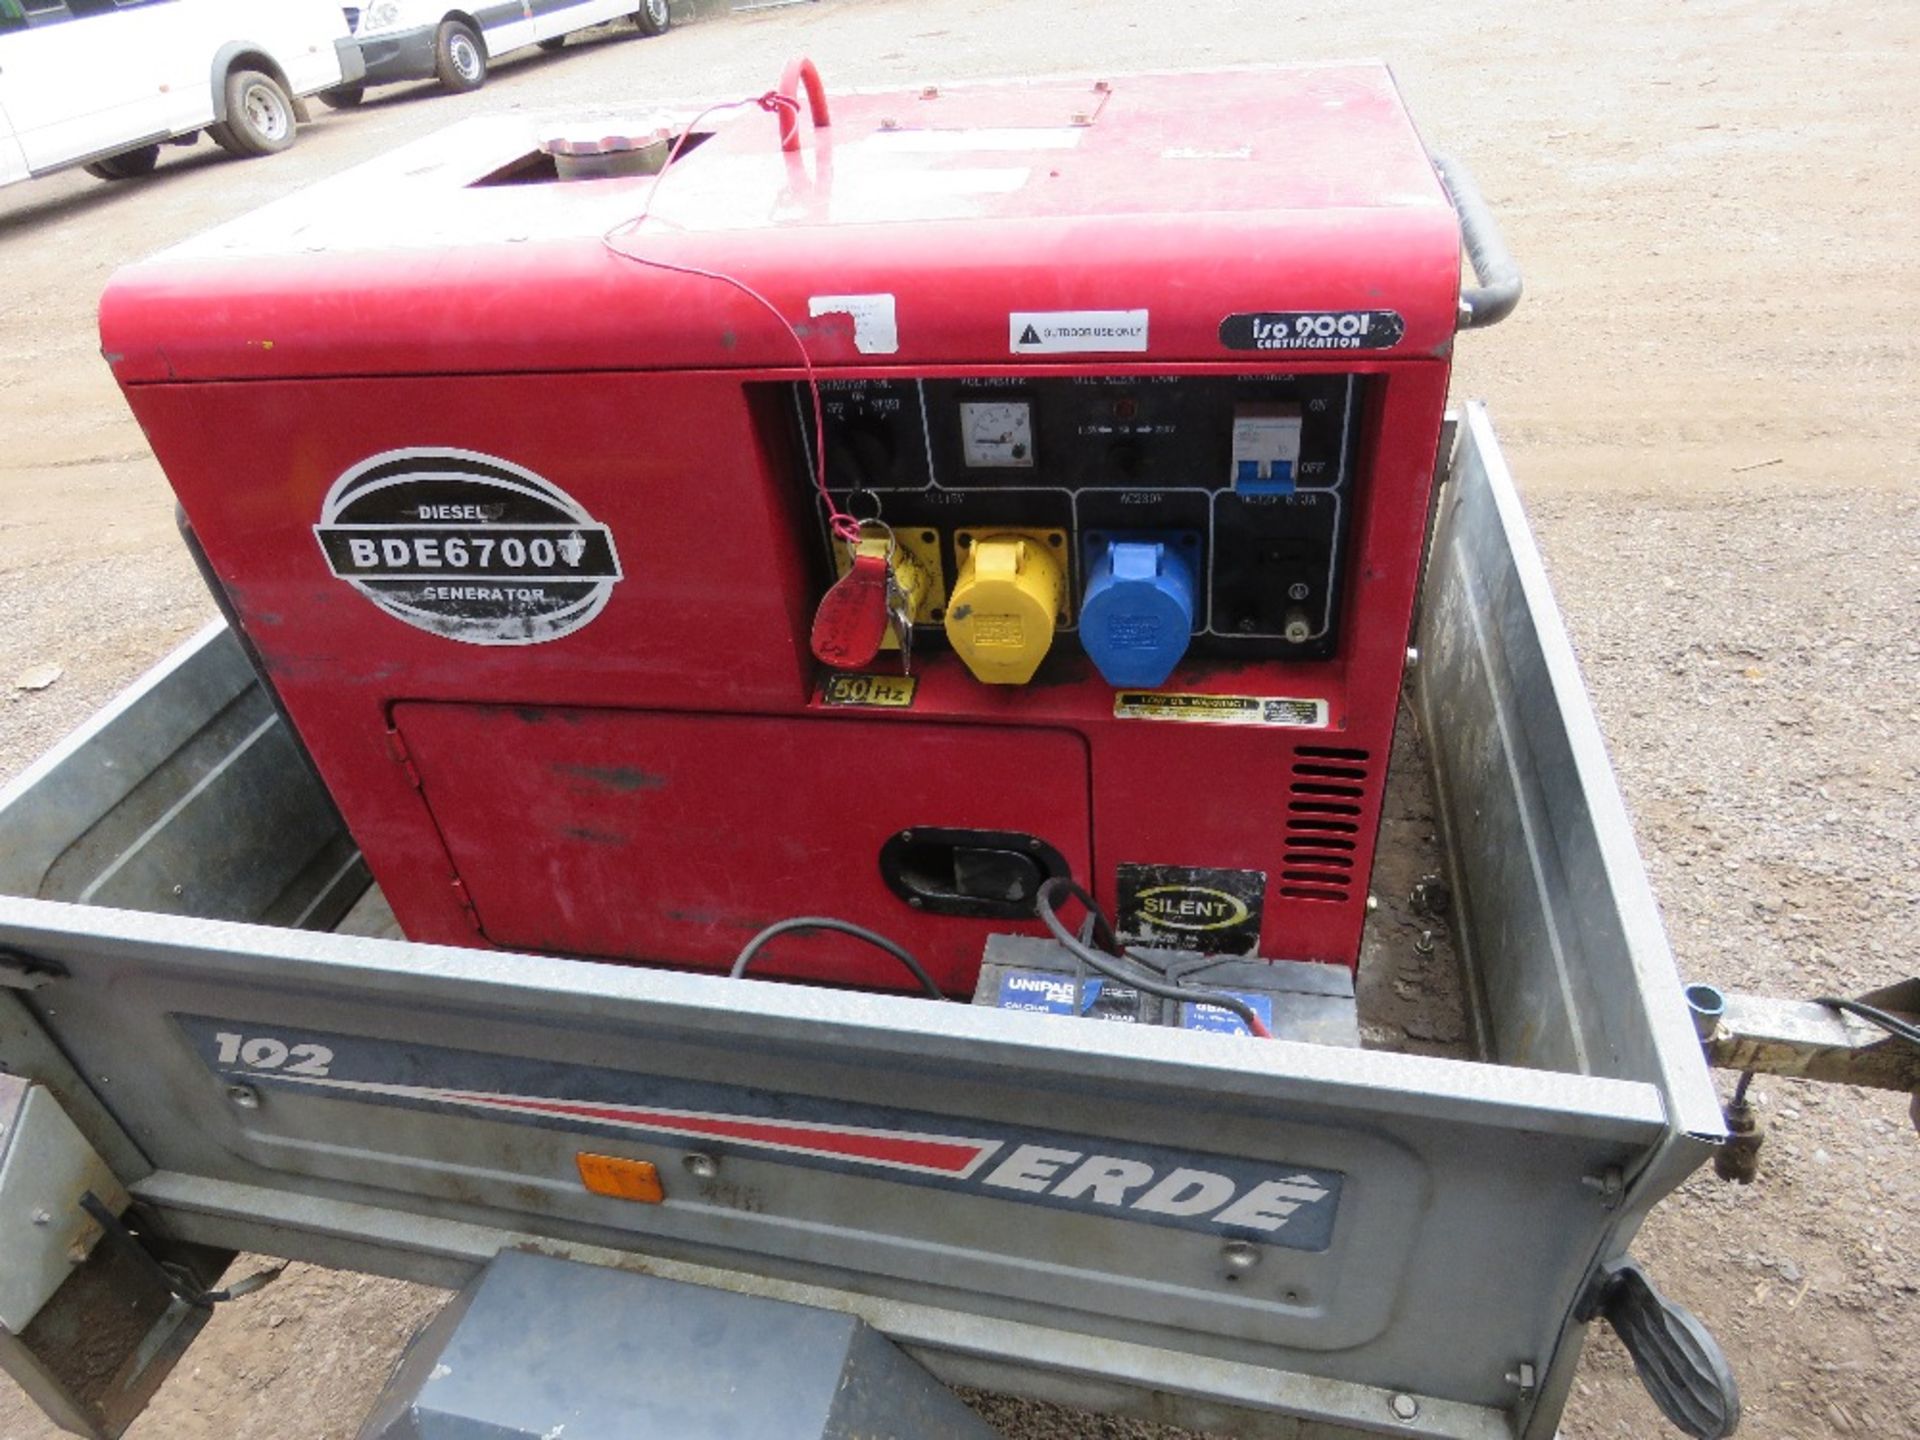 ERDE SMALL TRAILER WITH A DIESEL GENERATOR, 6KVA APPROX. - Image 4 of 4